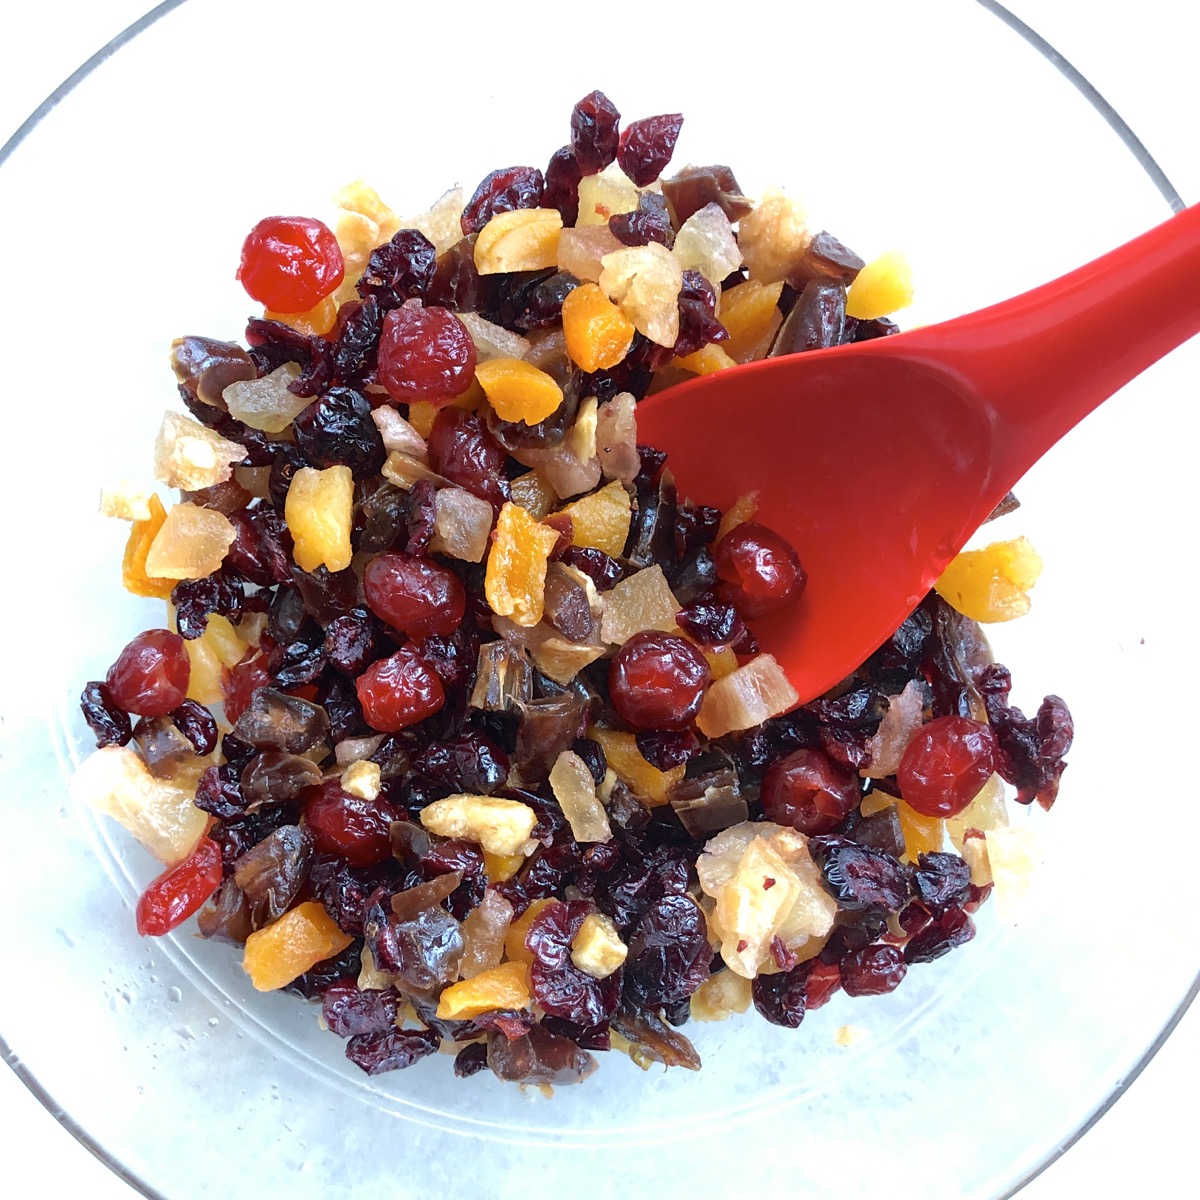 Choped dried fruit moistened with cranberry juice in a large bowl with a red spoon.